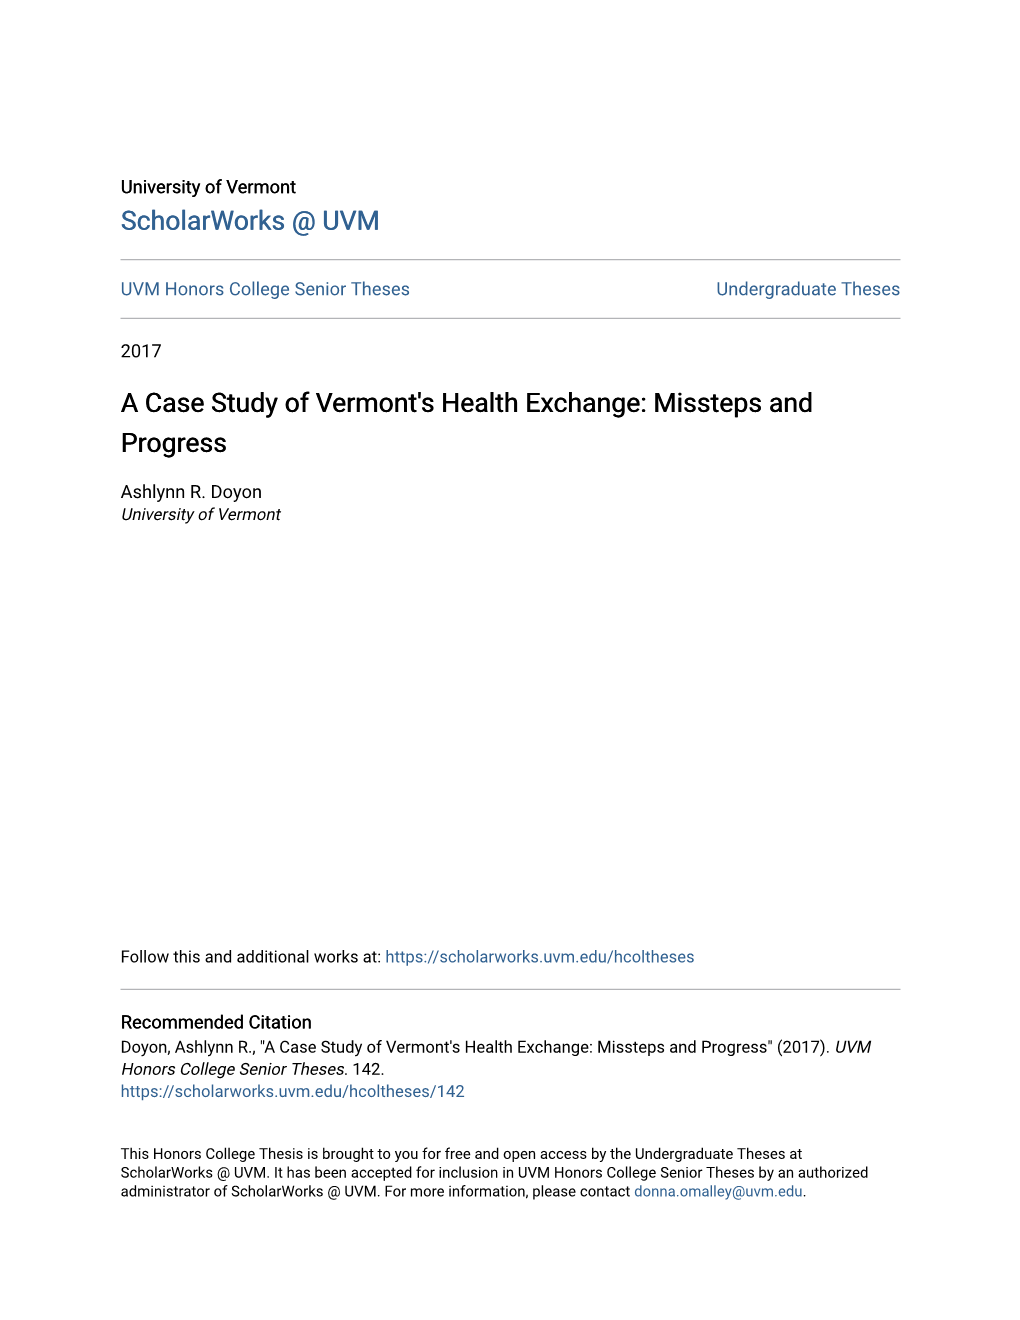 A Case Study of Vermont's Health Exchange: Missteps and Progress